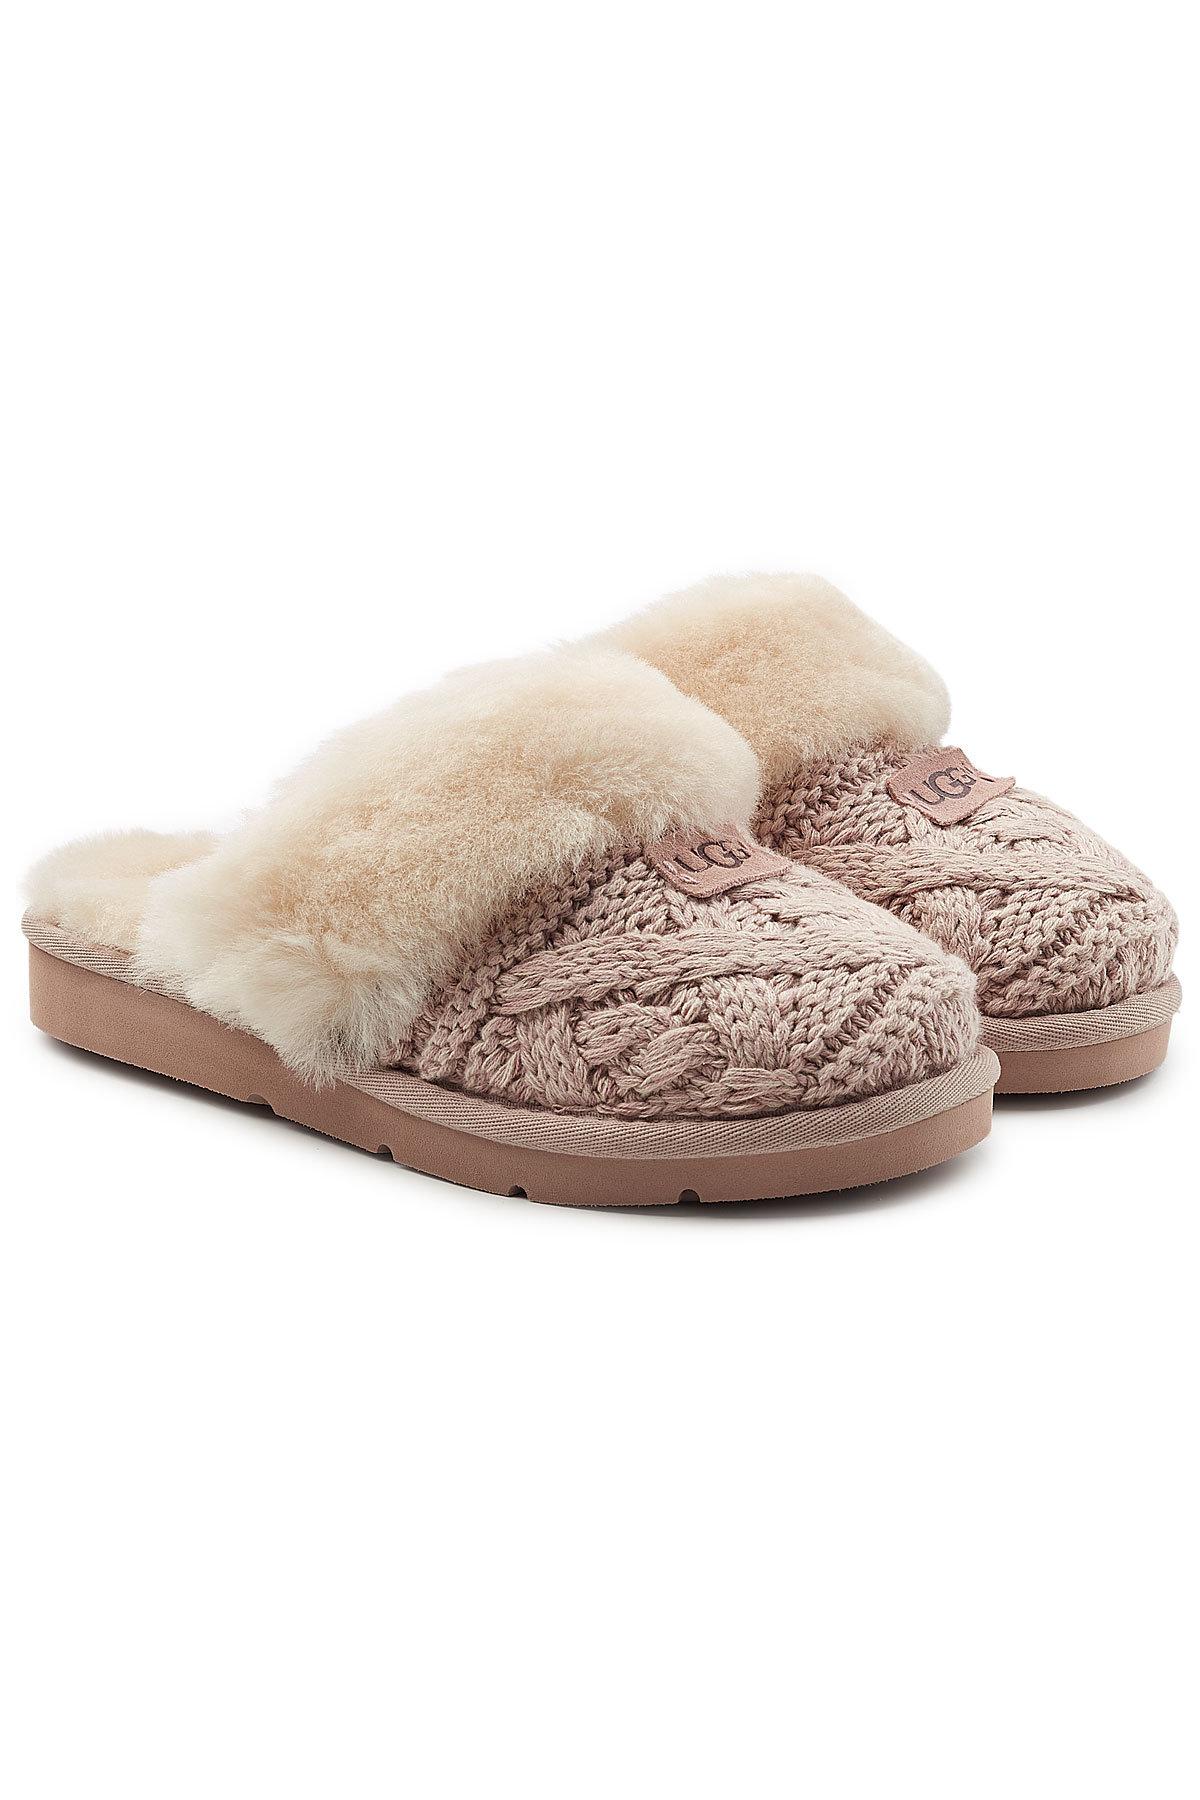 Ugg Cozy Knit Cable Slippers With 